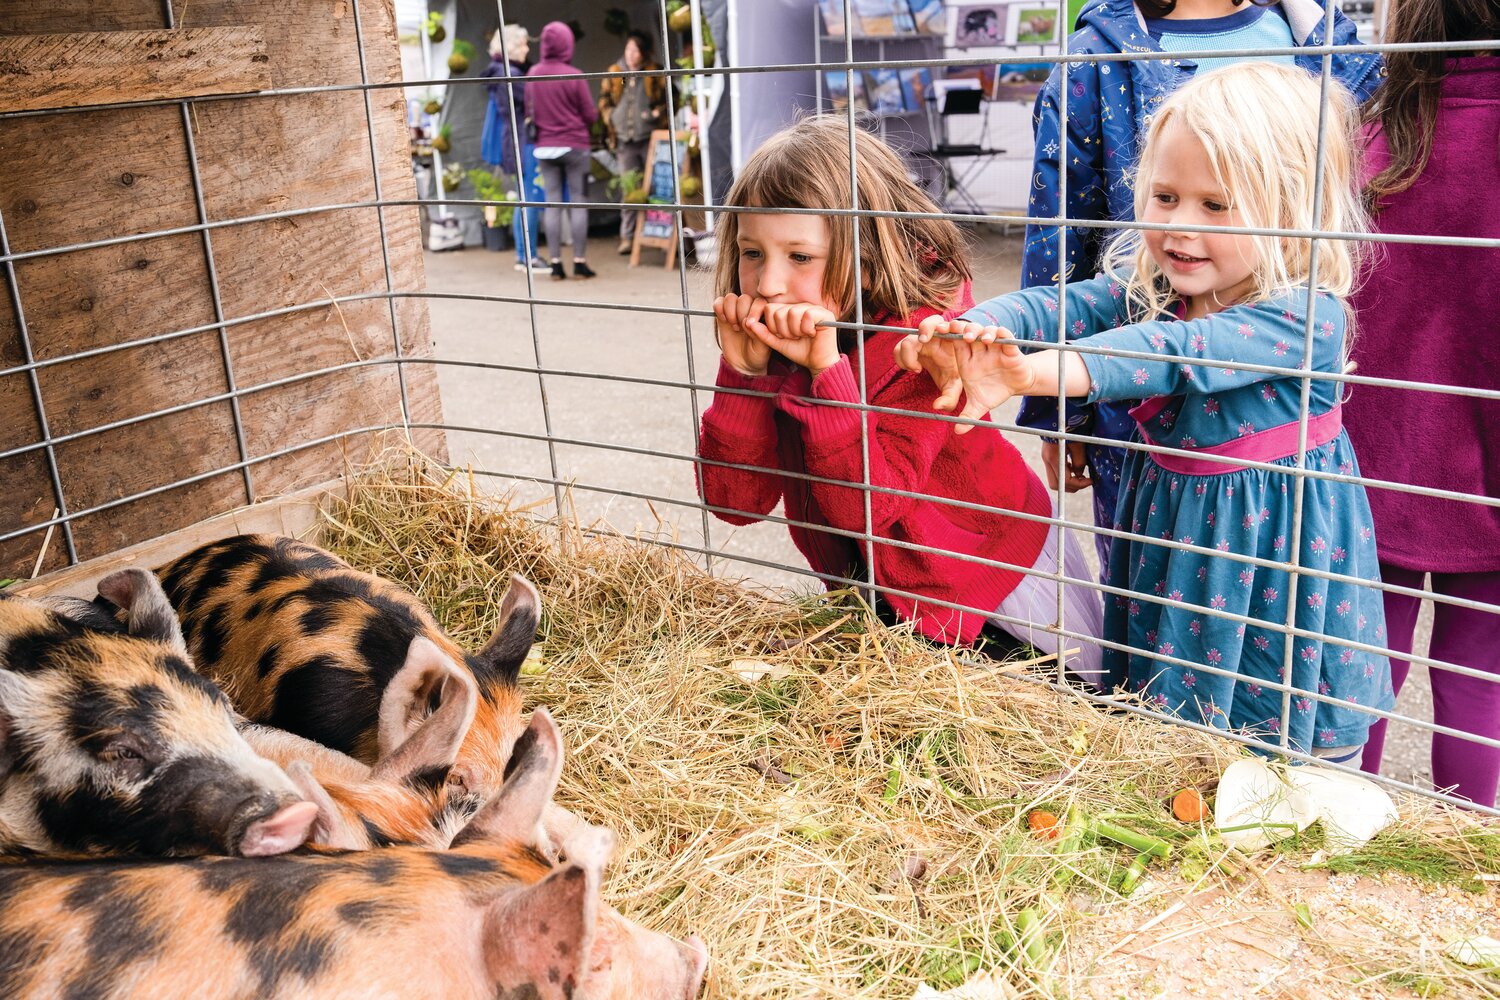 Chimacum Farmers Market opening day includes kid-friendly activities.